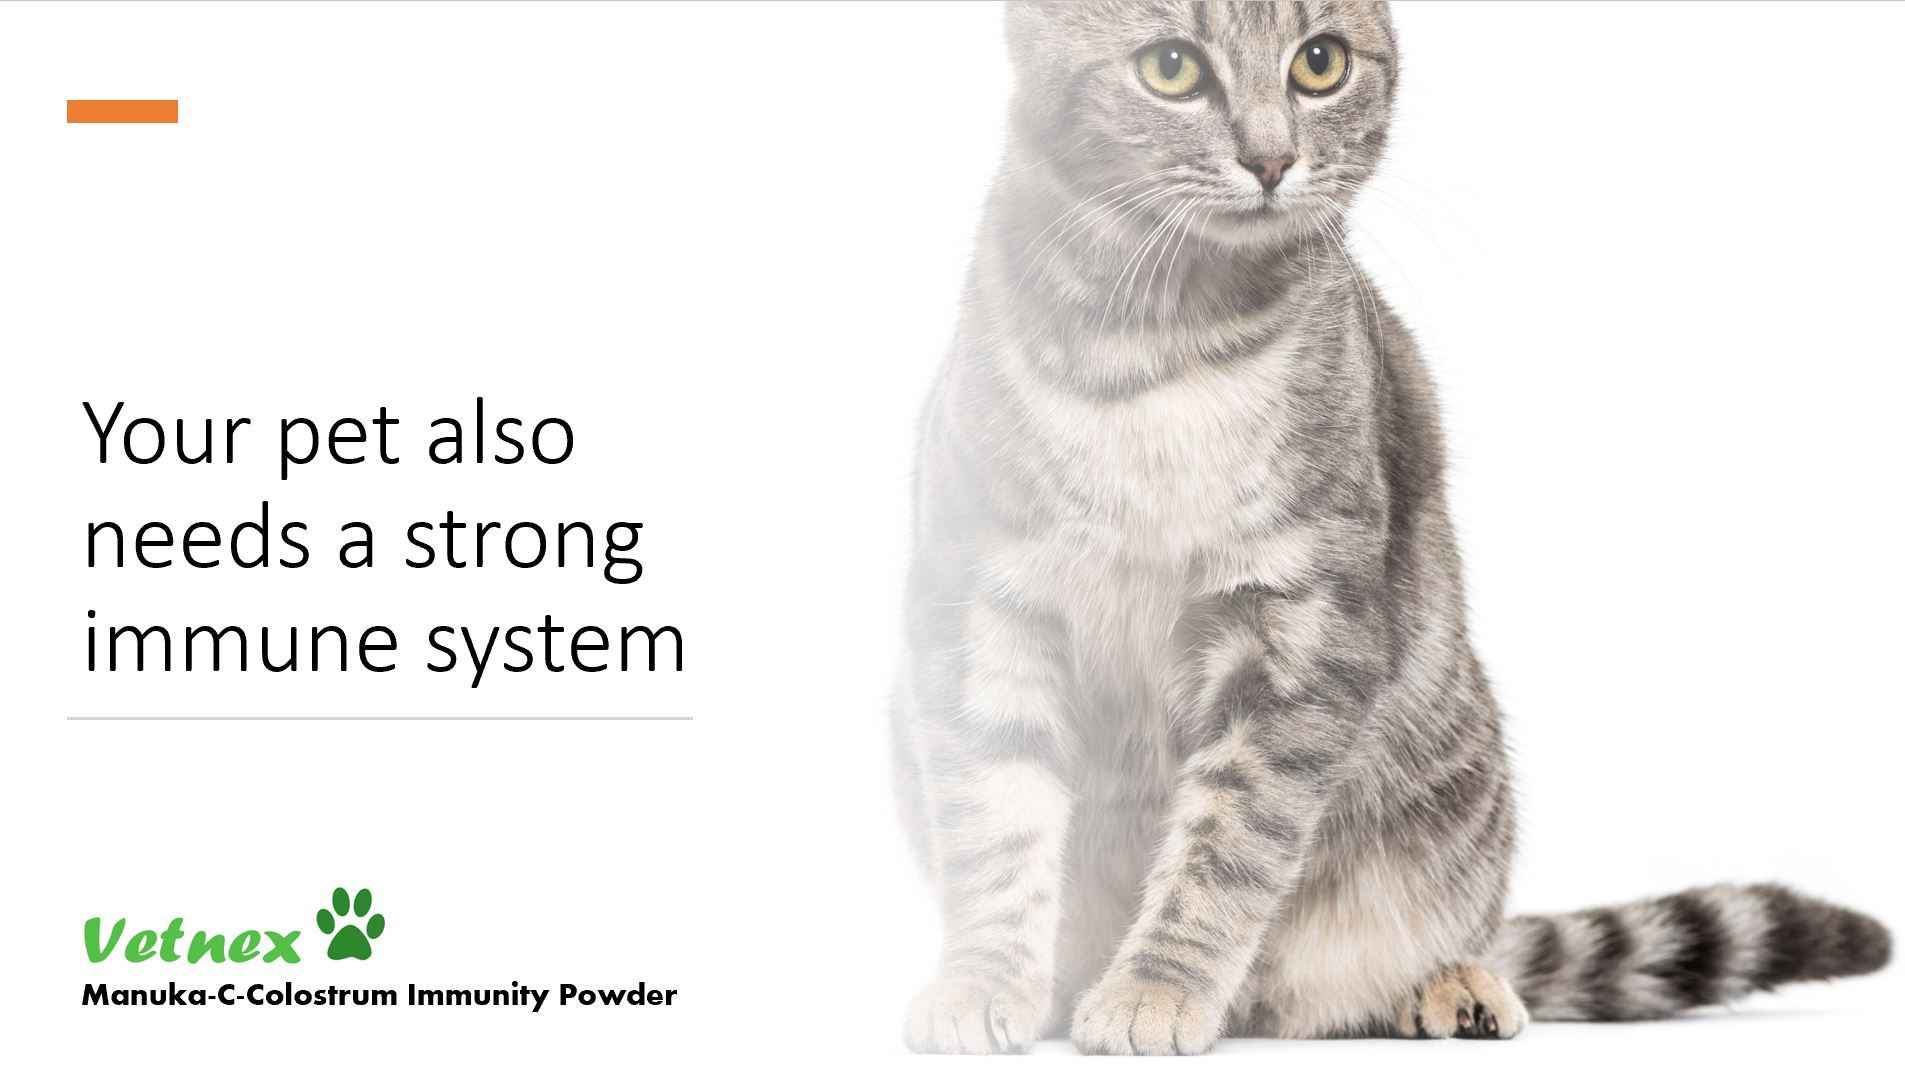 Your Pet Also Needs a Strong Immune System